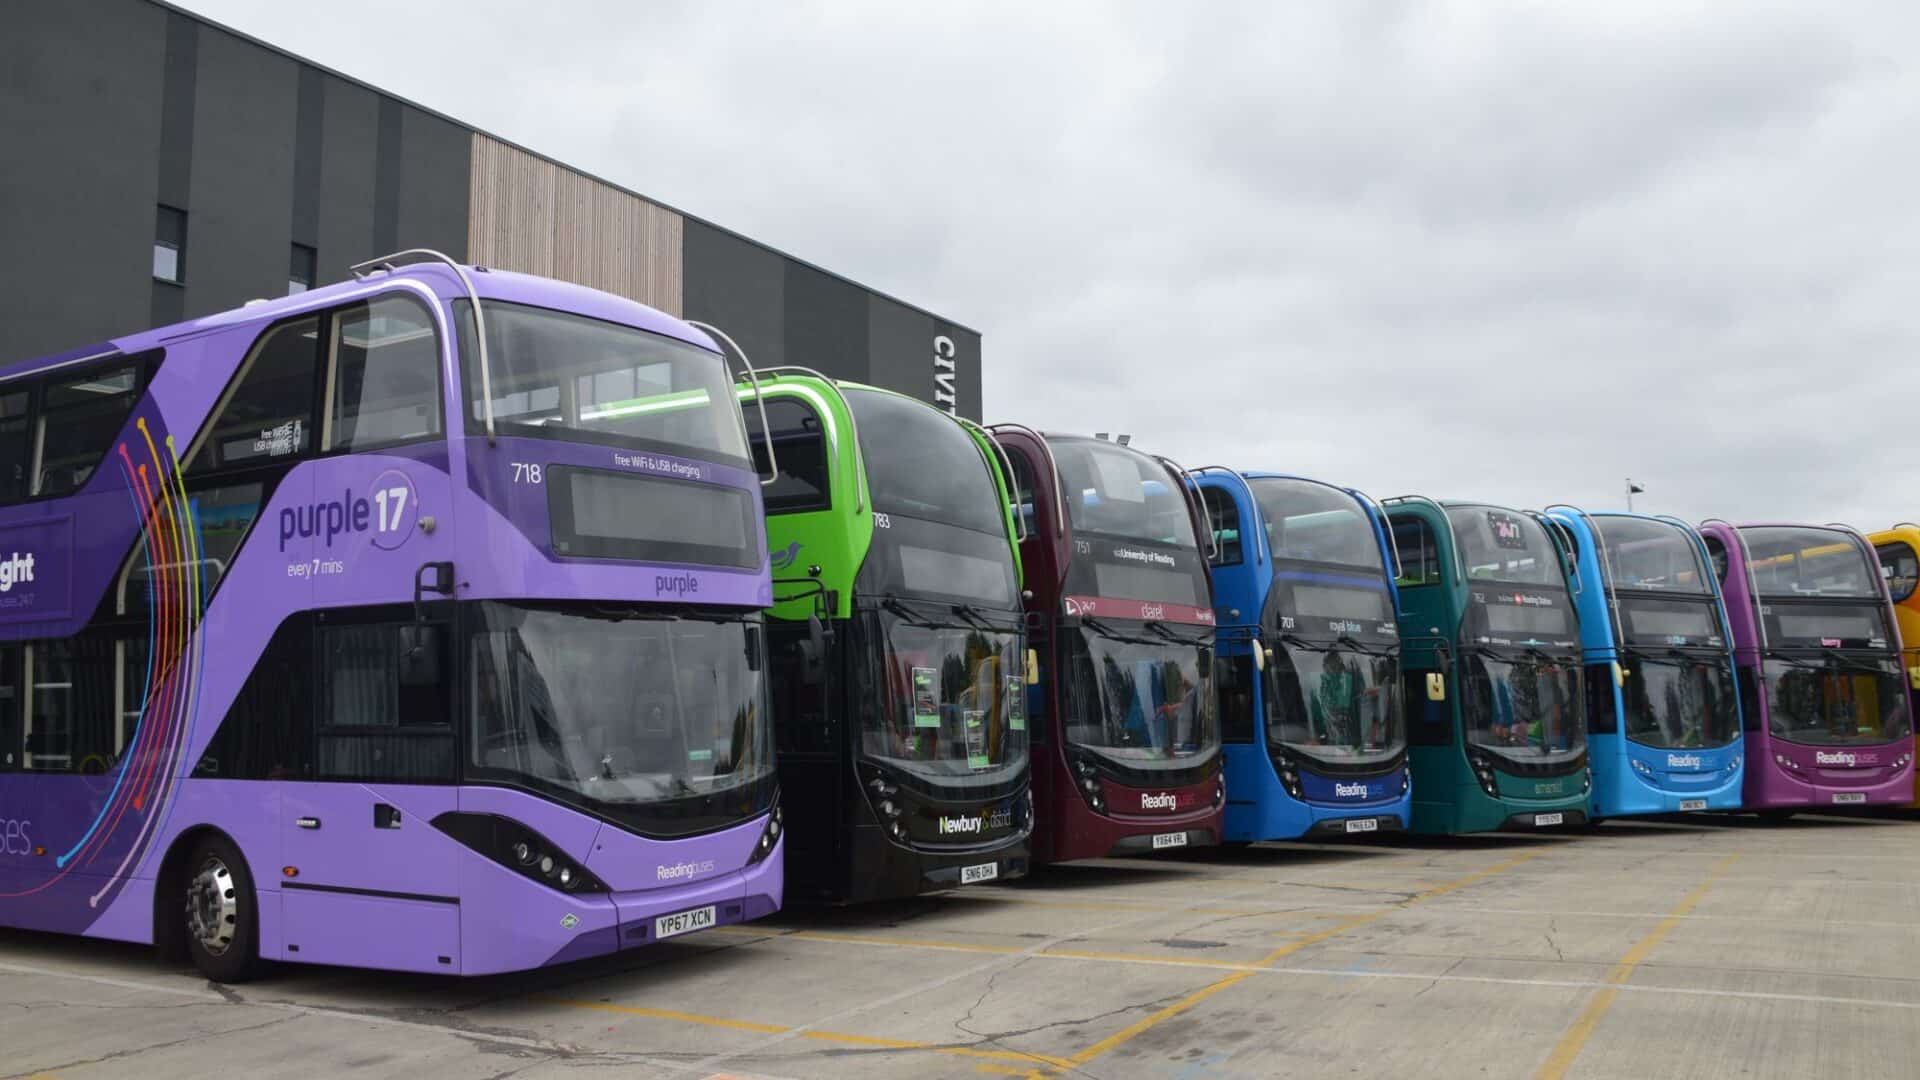 8 colourful Reading Buses double-decker buses lined up in the bus depot yard